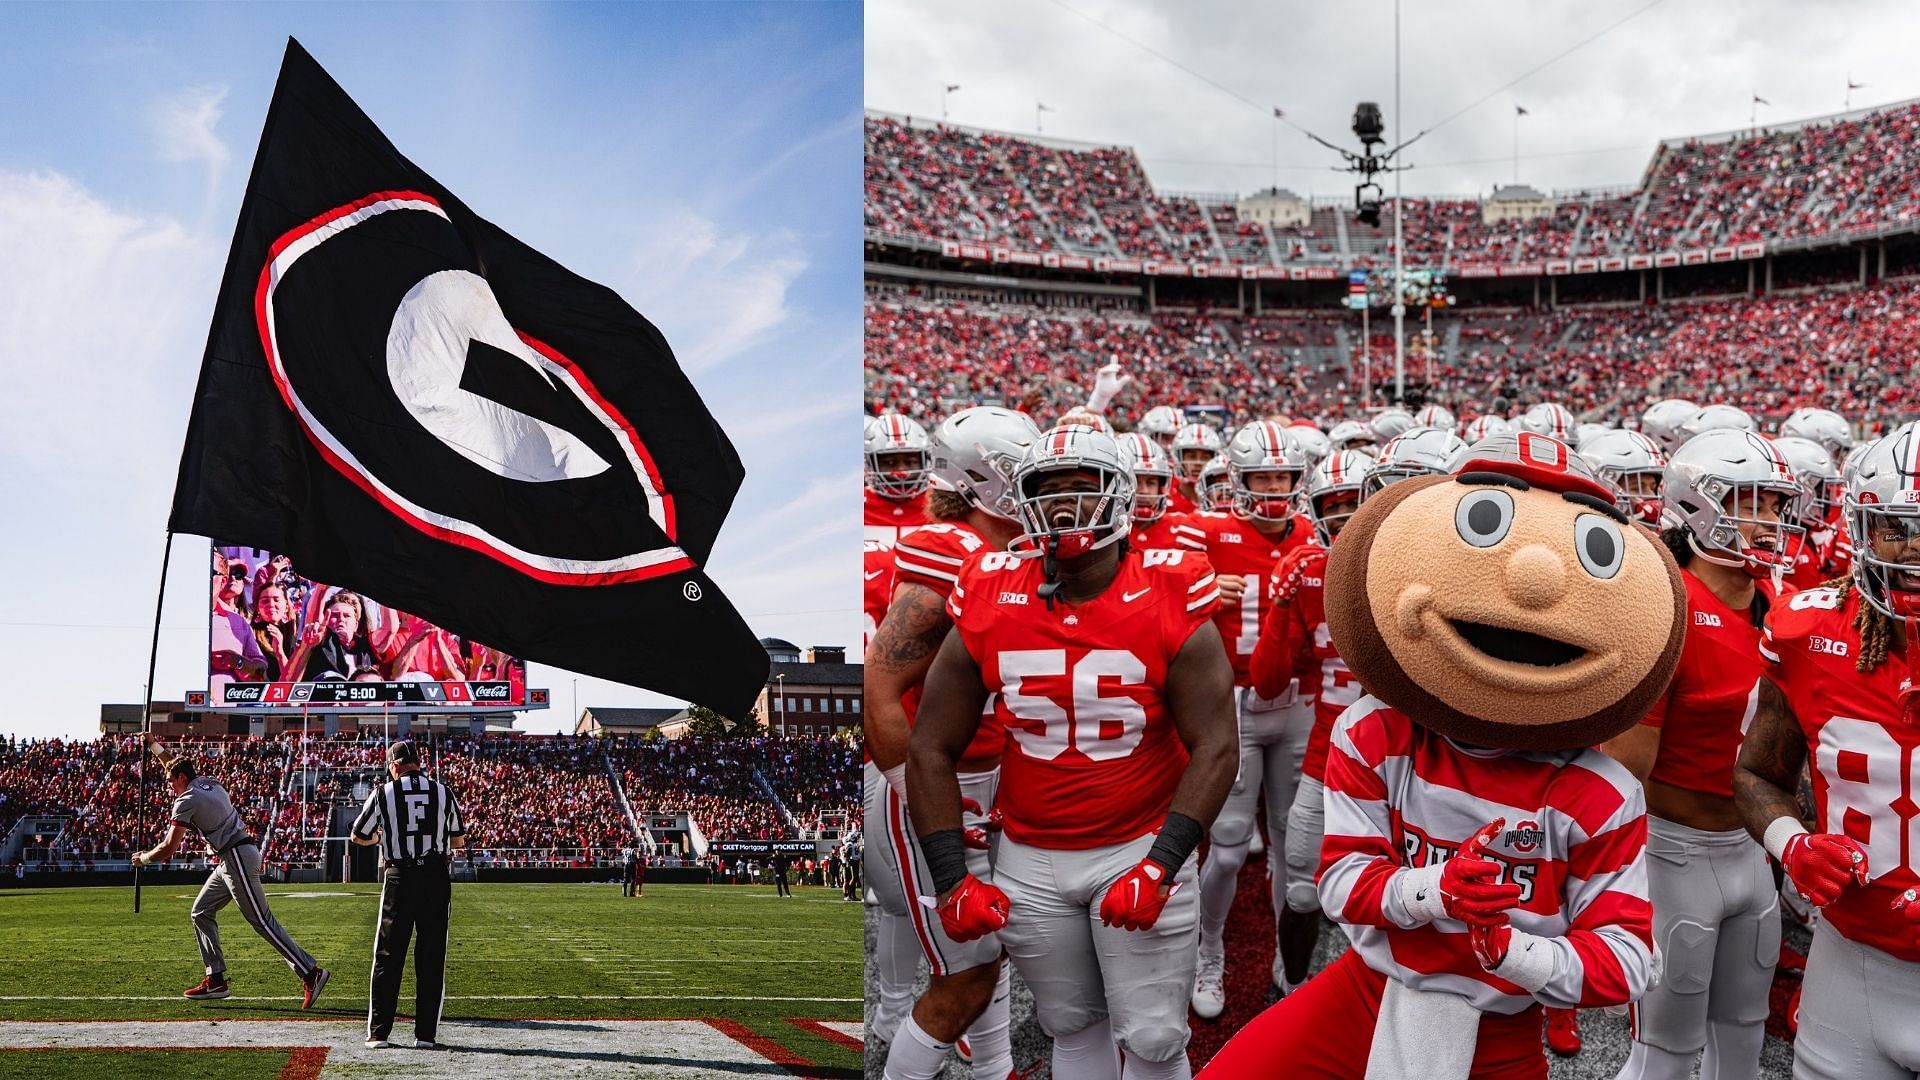 Picture Sources: @GeorgiaFootball, @OhioStateFB (X)